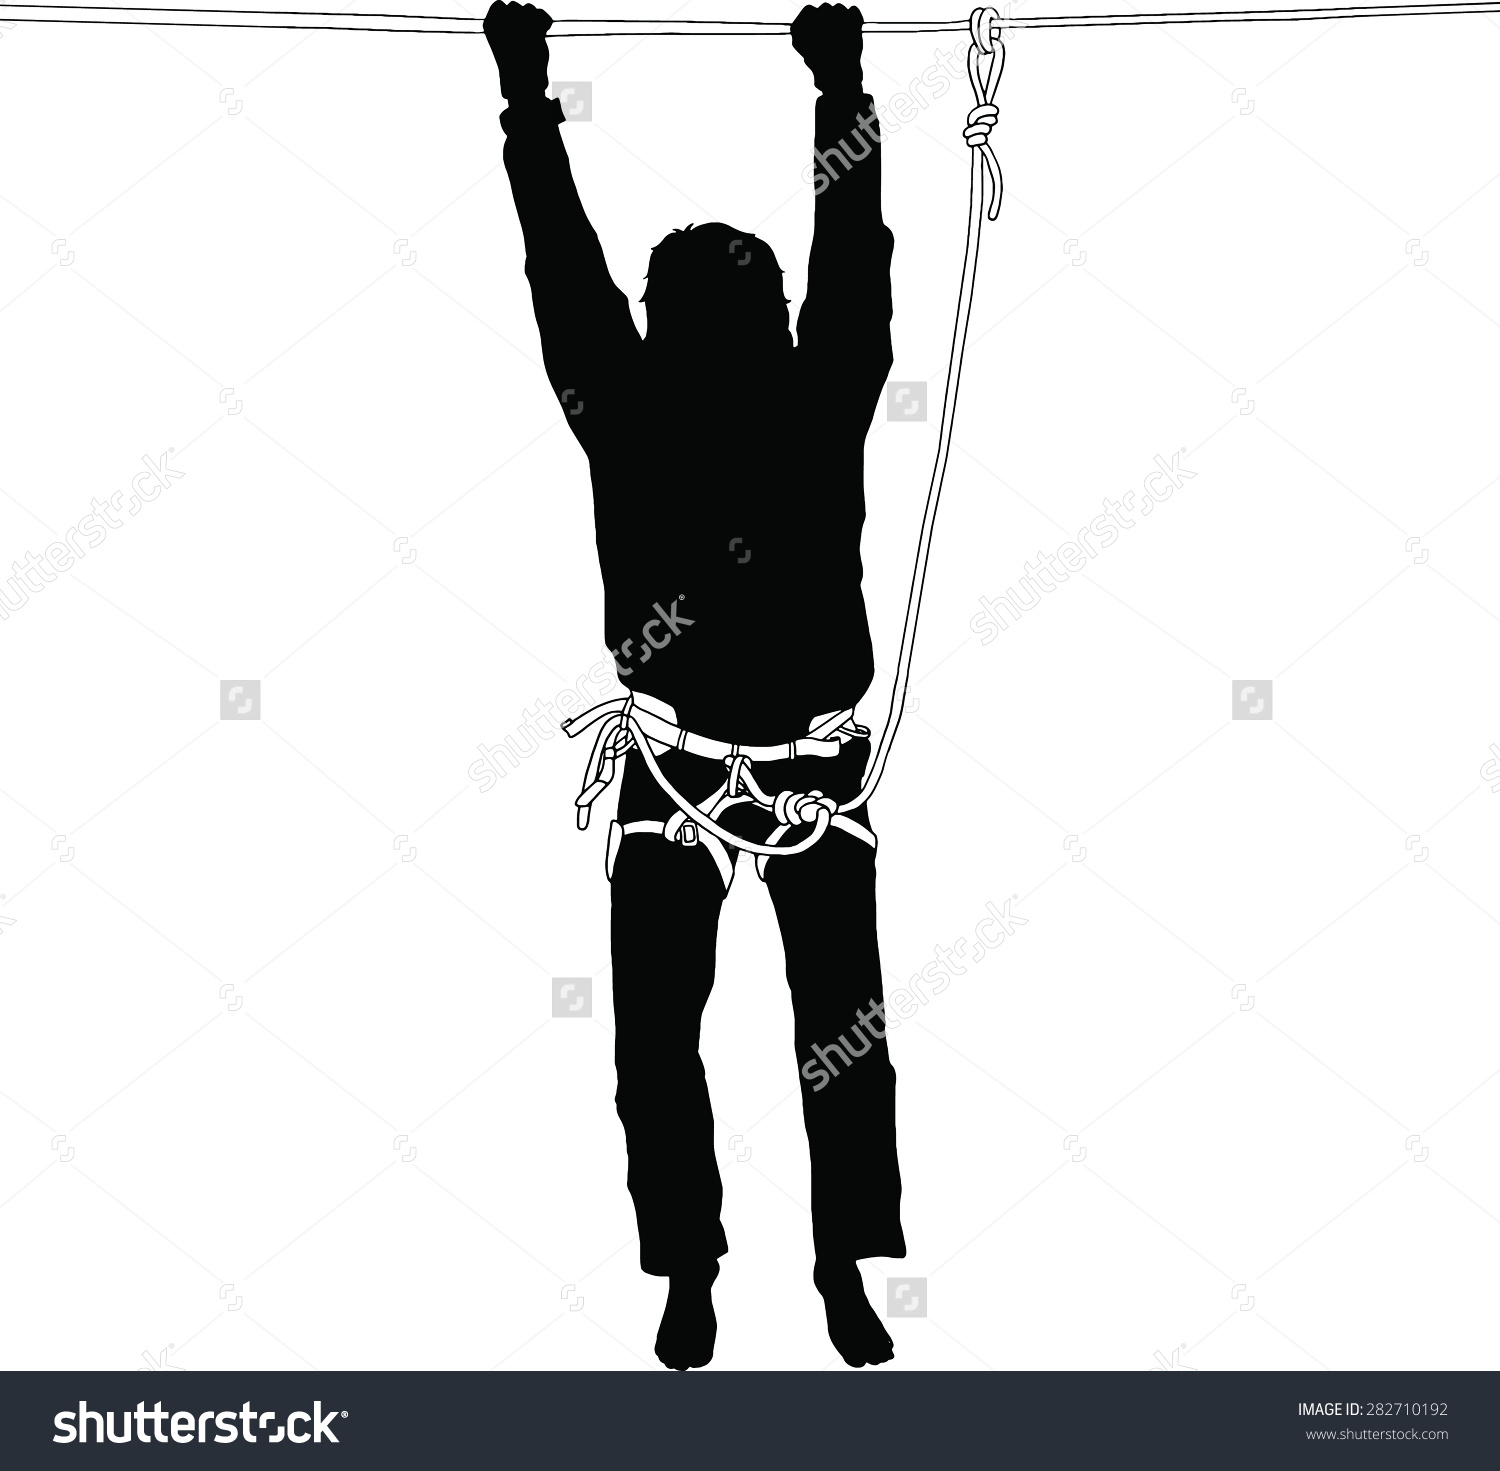 Silhouette Man Hanging On Highline Safety Stock Vector 282710192.